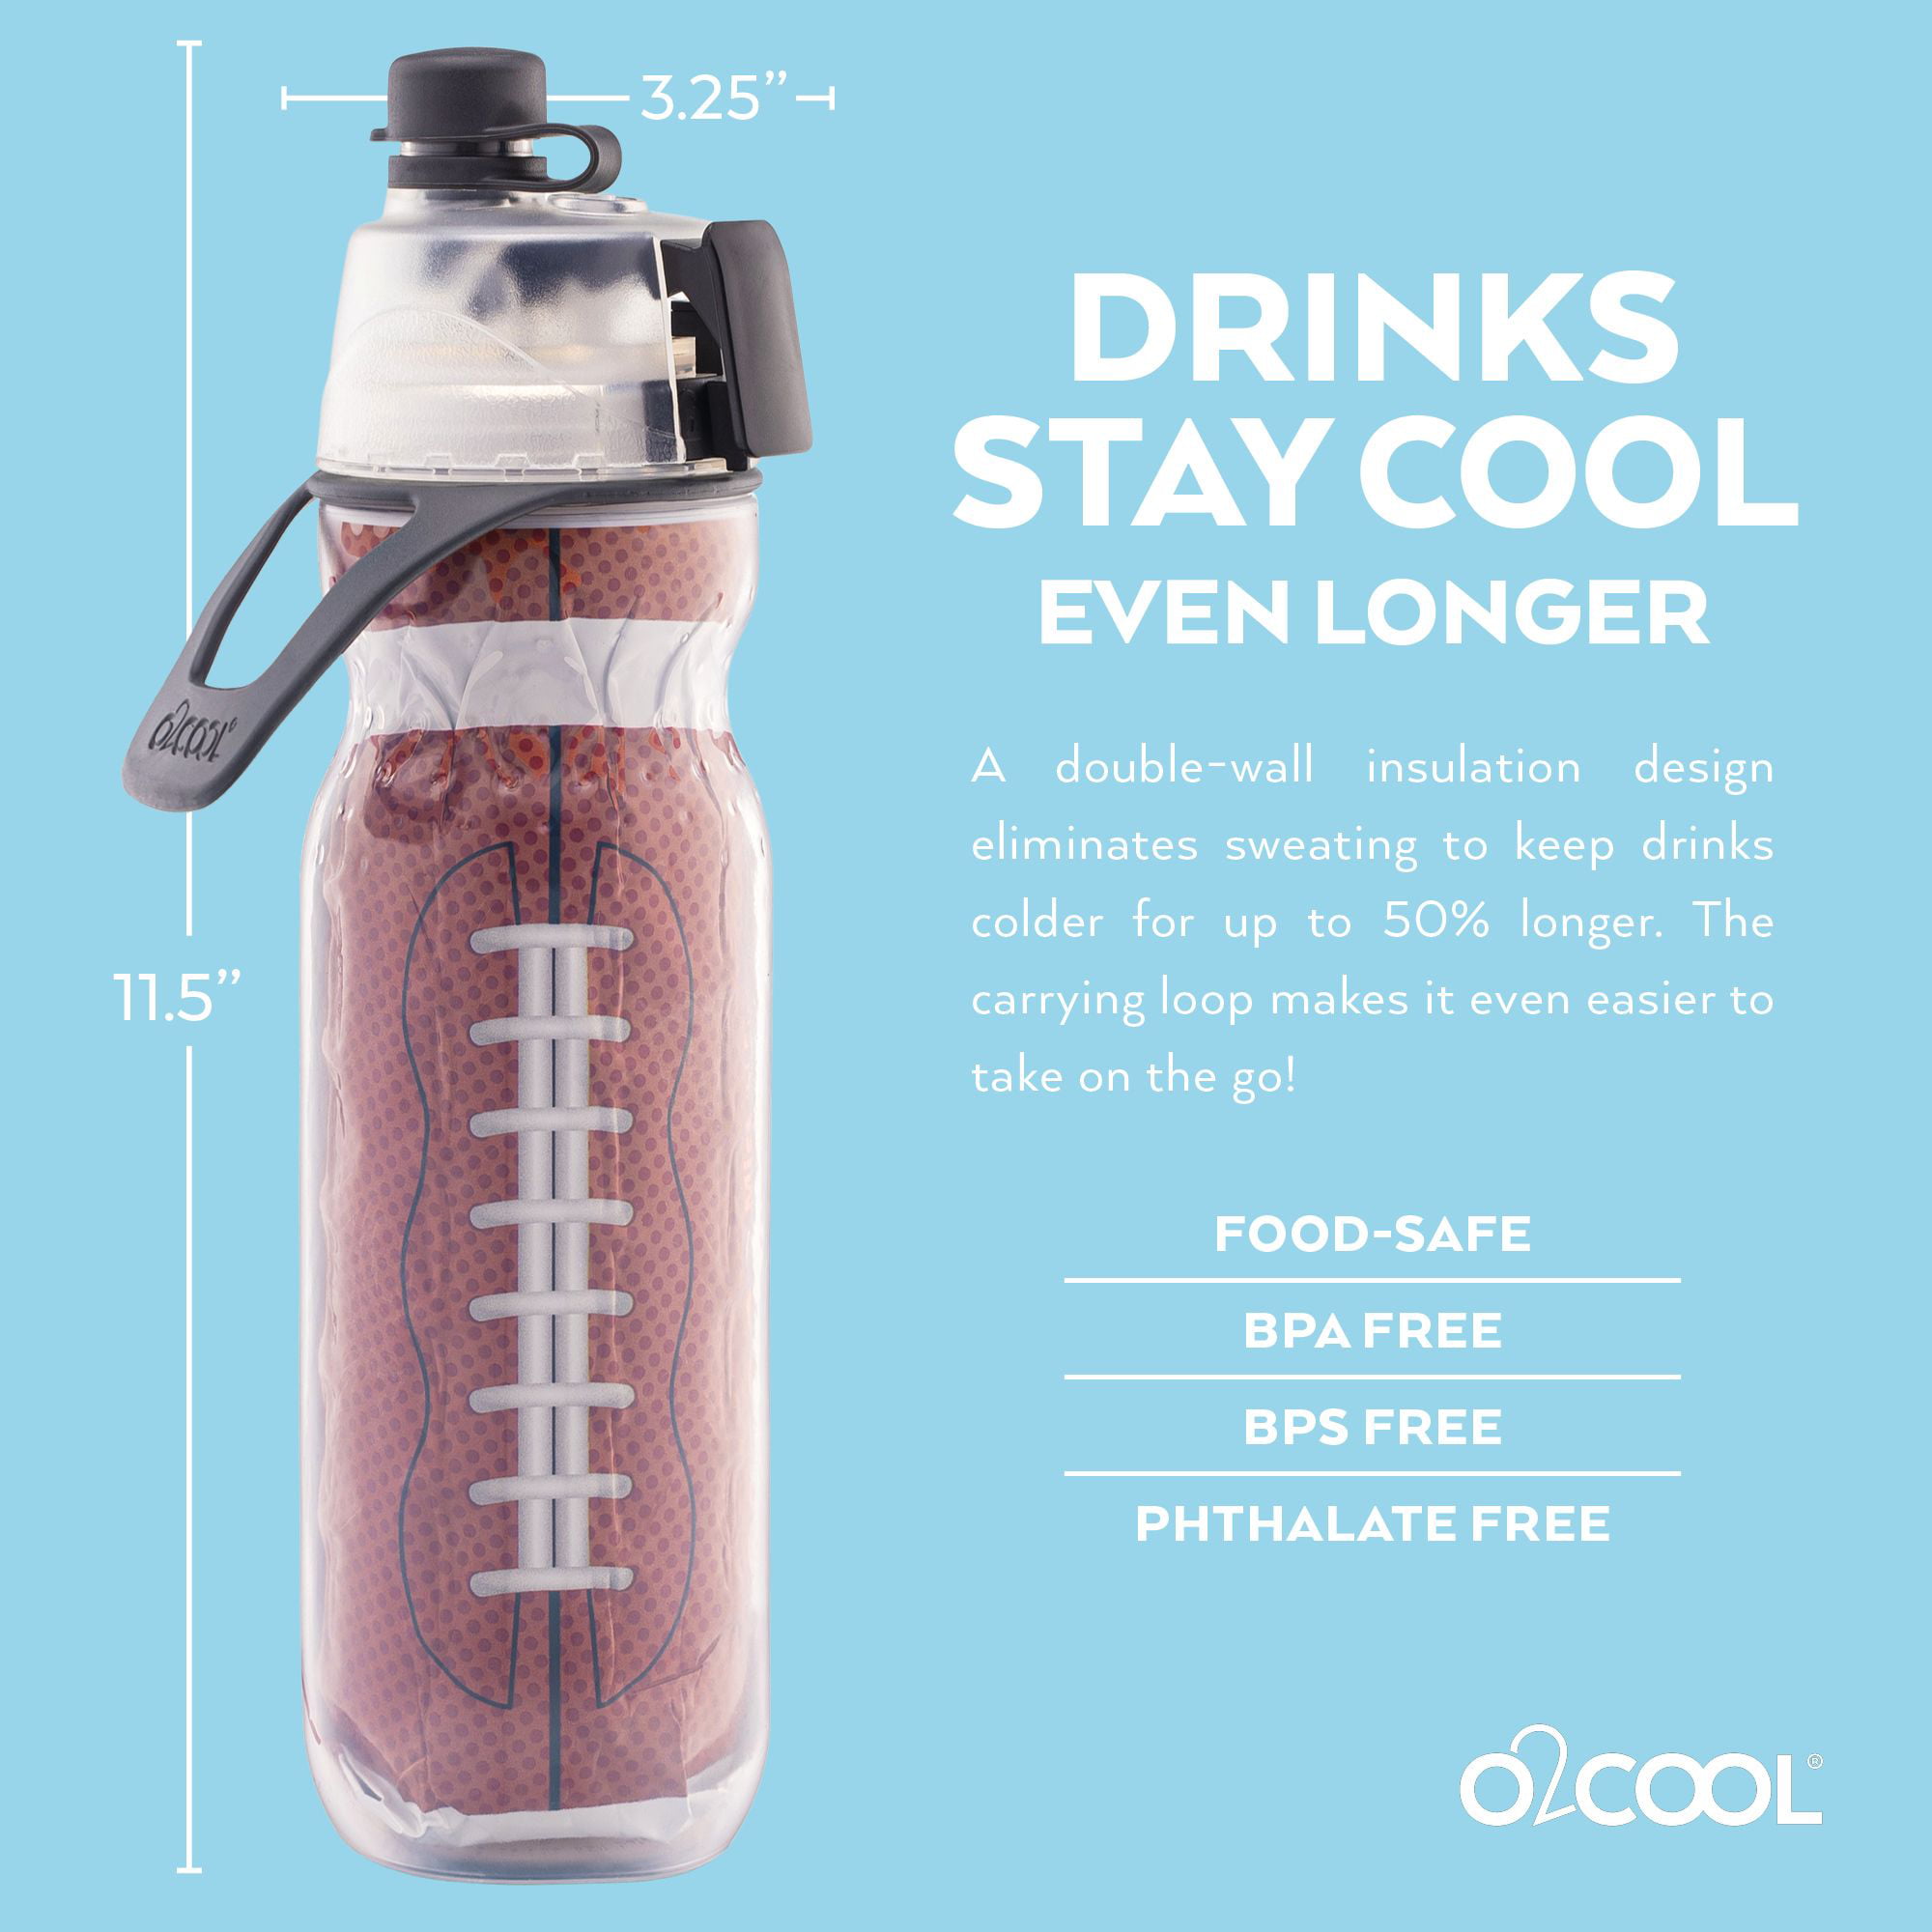 O2COOL Mist 'N Sip Kids Squeeze Mist Water Bottle 12 oz Owls Insulated BPA  Free